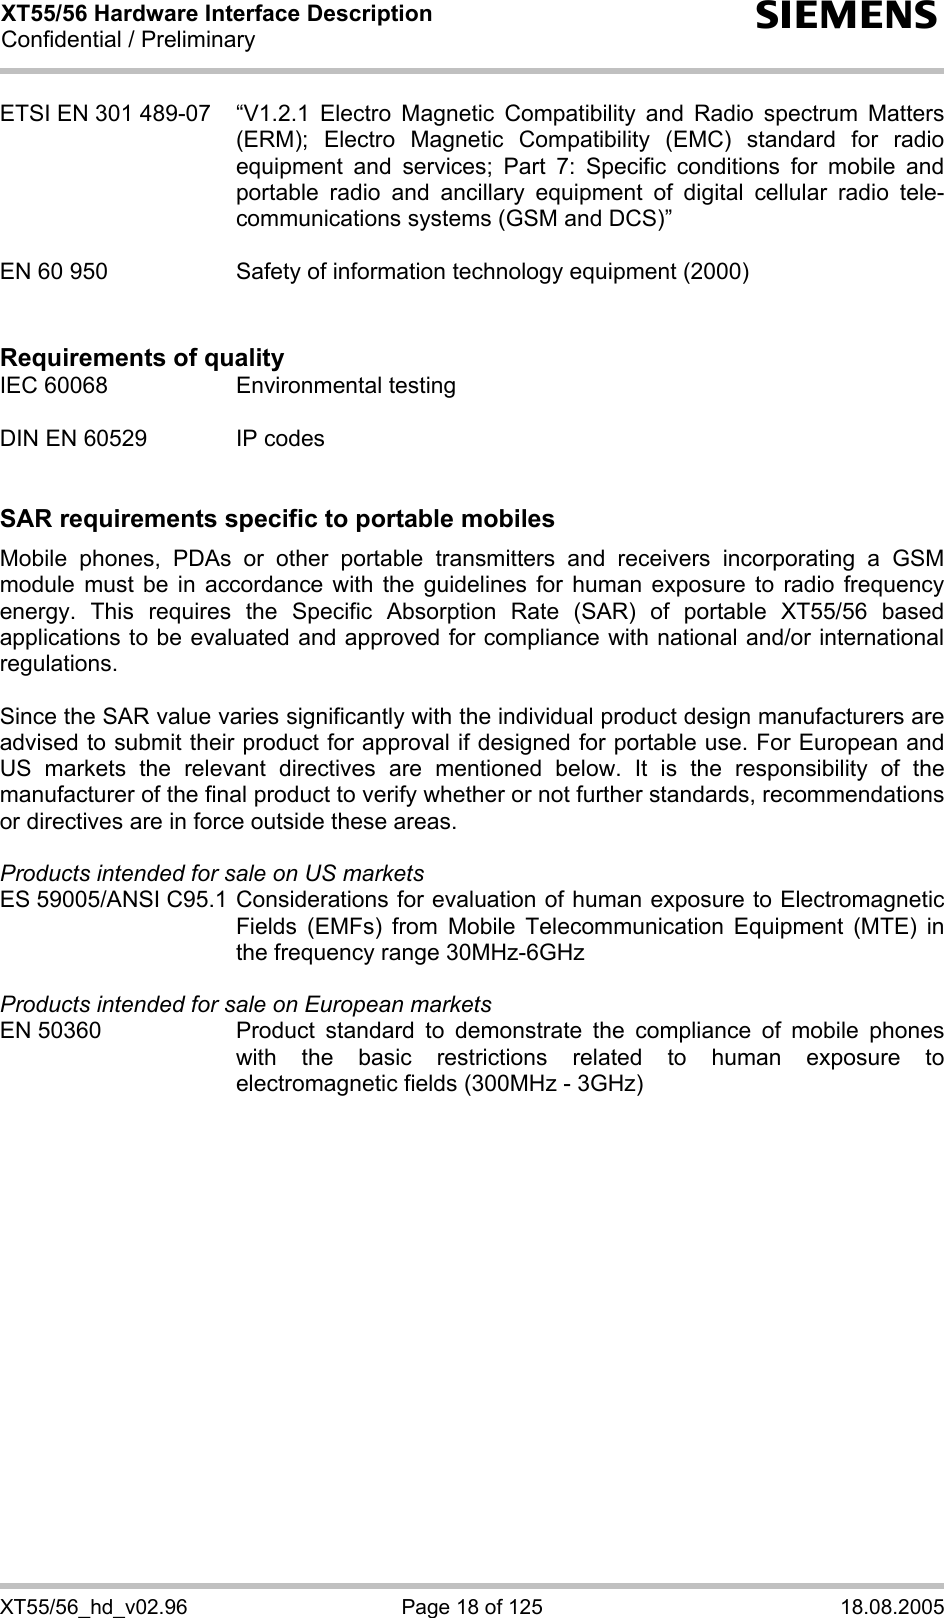 XT55/56 Hardware Interface Description Confidential / Preliminary s XT55/56_hd_v02.96  Page 18 of 125  18.08.2005 ETSI EN 301 489-07  “V1.2.1 Electro Magnetic Compatibility and Radio spectrum Matters (ERM); Electro Magnetic Compatibility (EMC) standard for radio equipment and services; Part 7: Specific conditions for mobile and portable radio and ancillary equipment of digital cellular radio tele-communications systems (GSM and DCS)”   EN 60 950  Safety of information technology equipment (2000)   Requirements of quality IEC 60068  Environmental testing  DIN EN 60529  IP codes   SAR requirements specific to portable mobiles Mobile phones, PDAs or other portable transmitters and receivers incorporating a GSM module must be in accordance with the guidelines for human exposure to radio frequency energy. This requires the Specific Absorption Rate (SAR) of portable XT55/56 based applications to be evaluated and approved for compliance with national and/or international regulations.   Since the SAR value varies significantly with the individual product design manufacturers are advised to submit their product for approval if designed for portable use. For European and US markets the relevant directives are mentioned below. It is the responsibility of the manufacturer of the final product to verify whether or not further standards, recommendations or directives are in force outside these areas.   Products intended for sale on US markets ES 59005/ANSI C95.1 Considerations for evaluation of human exposure to Electromagnetic Fields (EMFs) from Mobile Telecommunication Equipment (MTE) in the frequency range 30MHz-6GHz   Products intended for sale on European markets EN 50360  Product standard to demonstrate the compliance of mobile phones with the basic restrictions related to human exposure to electromagnetic fields (300MHz - 3GHz)  